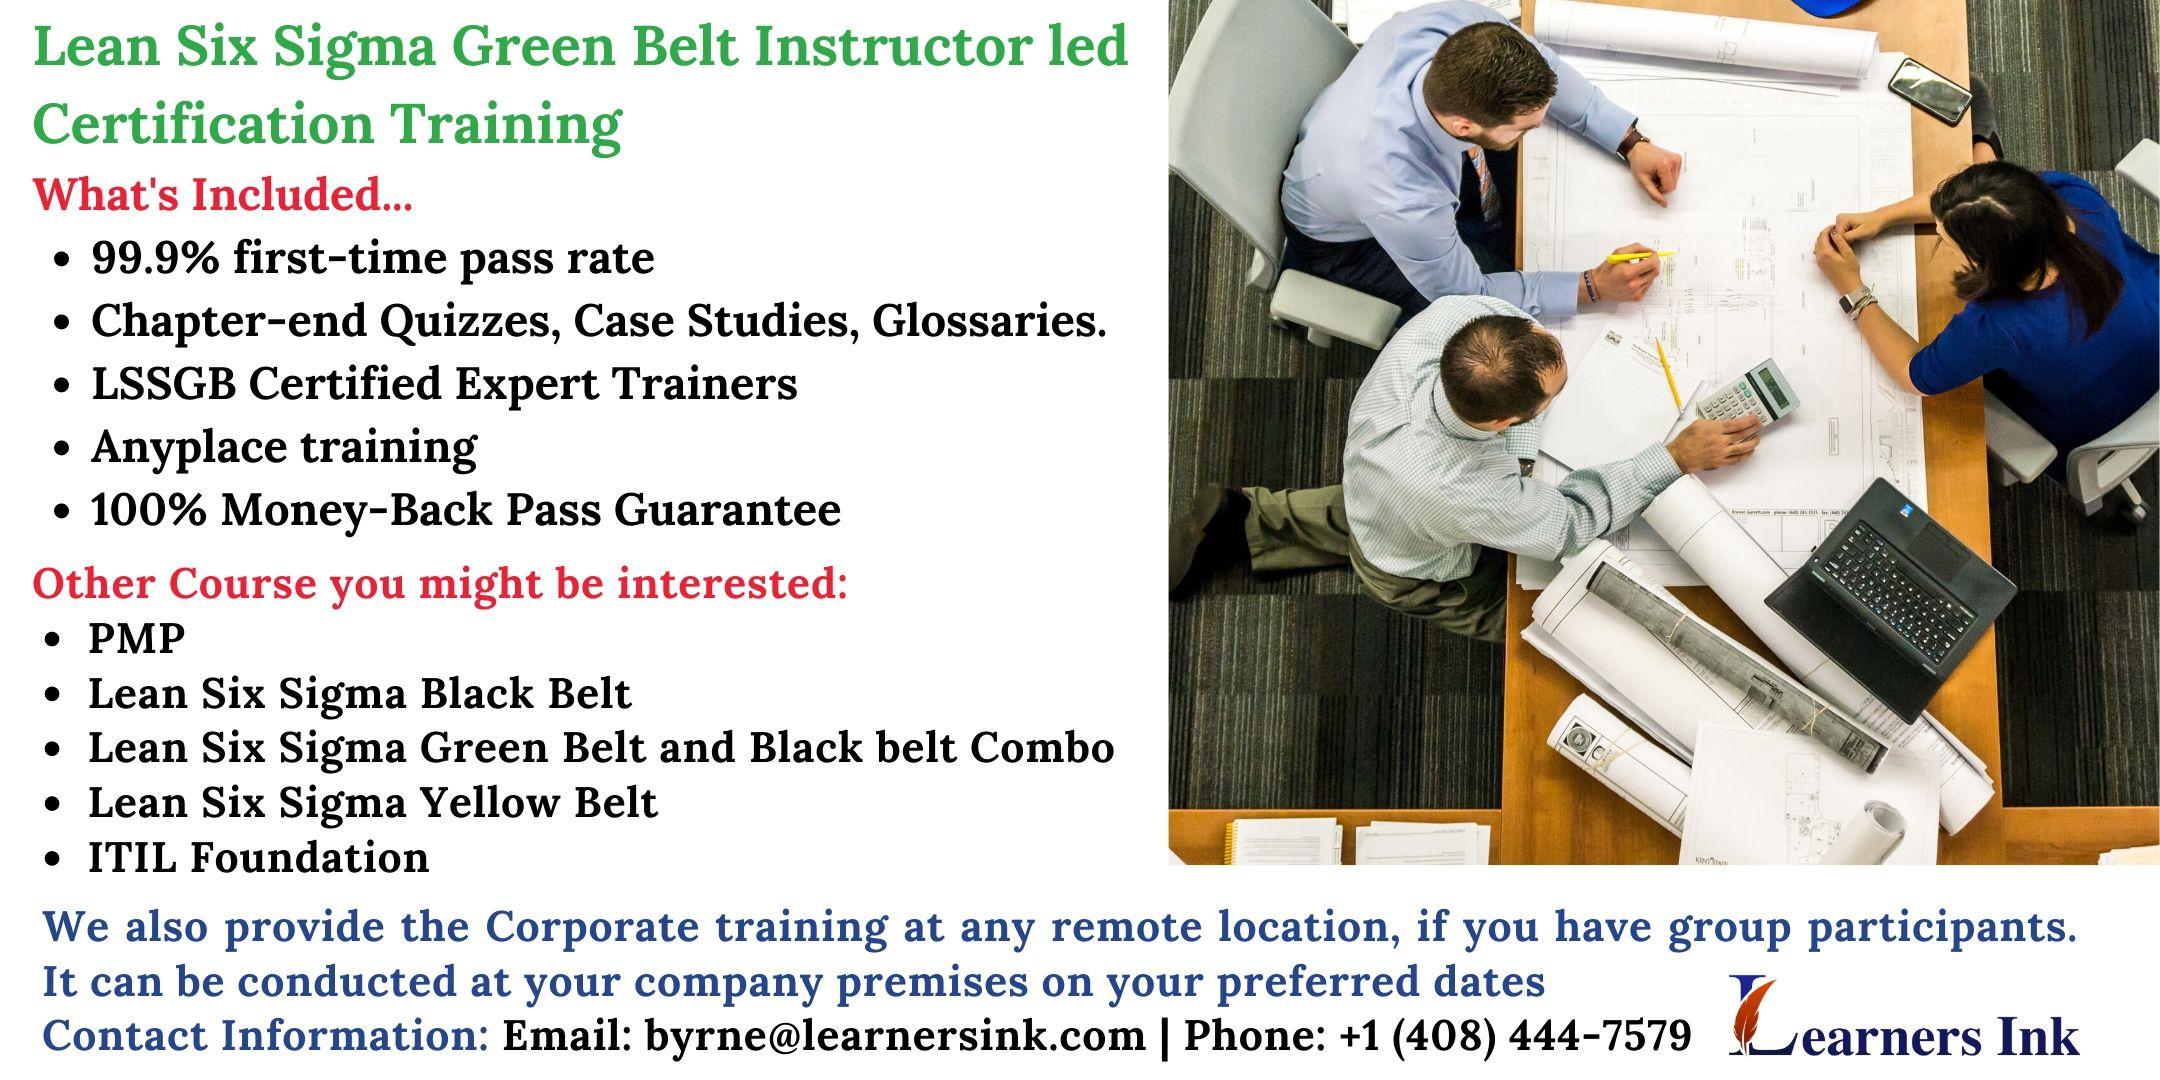 Lean Six Sigma Green Belt Certification Training Course (LSSGB) in Arvada